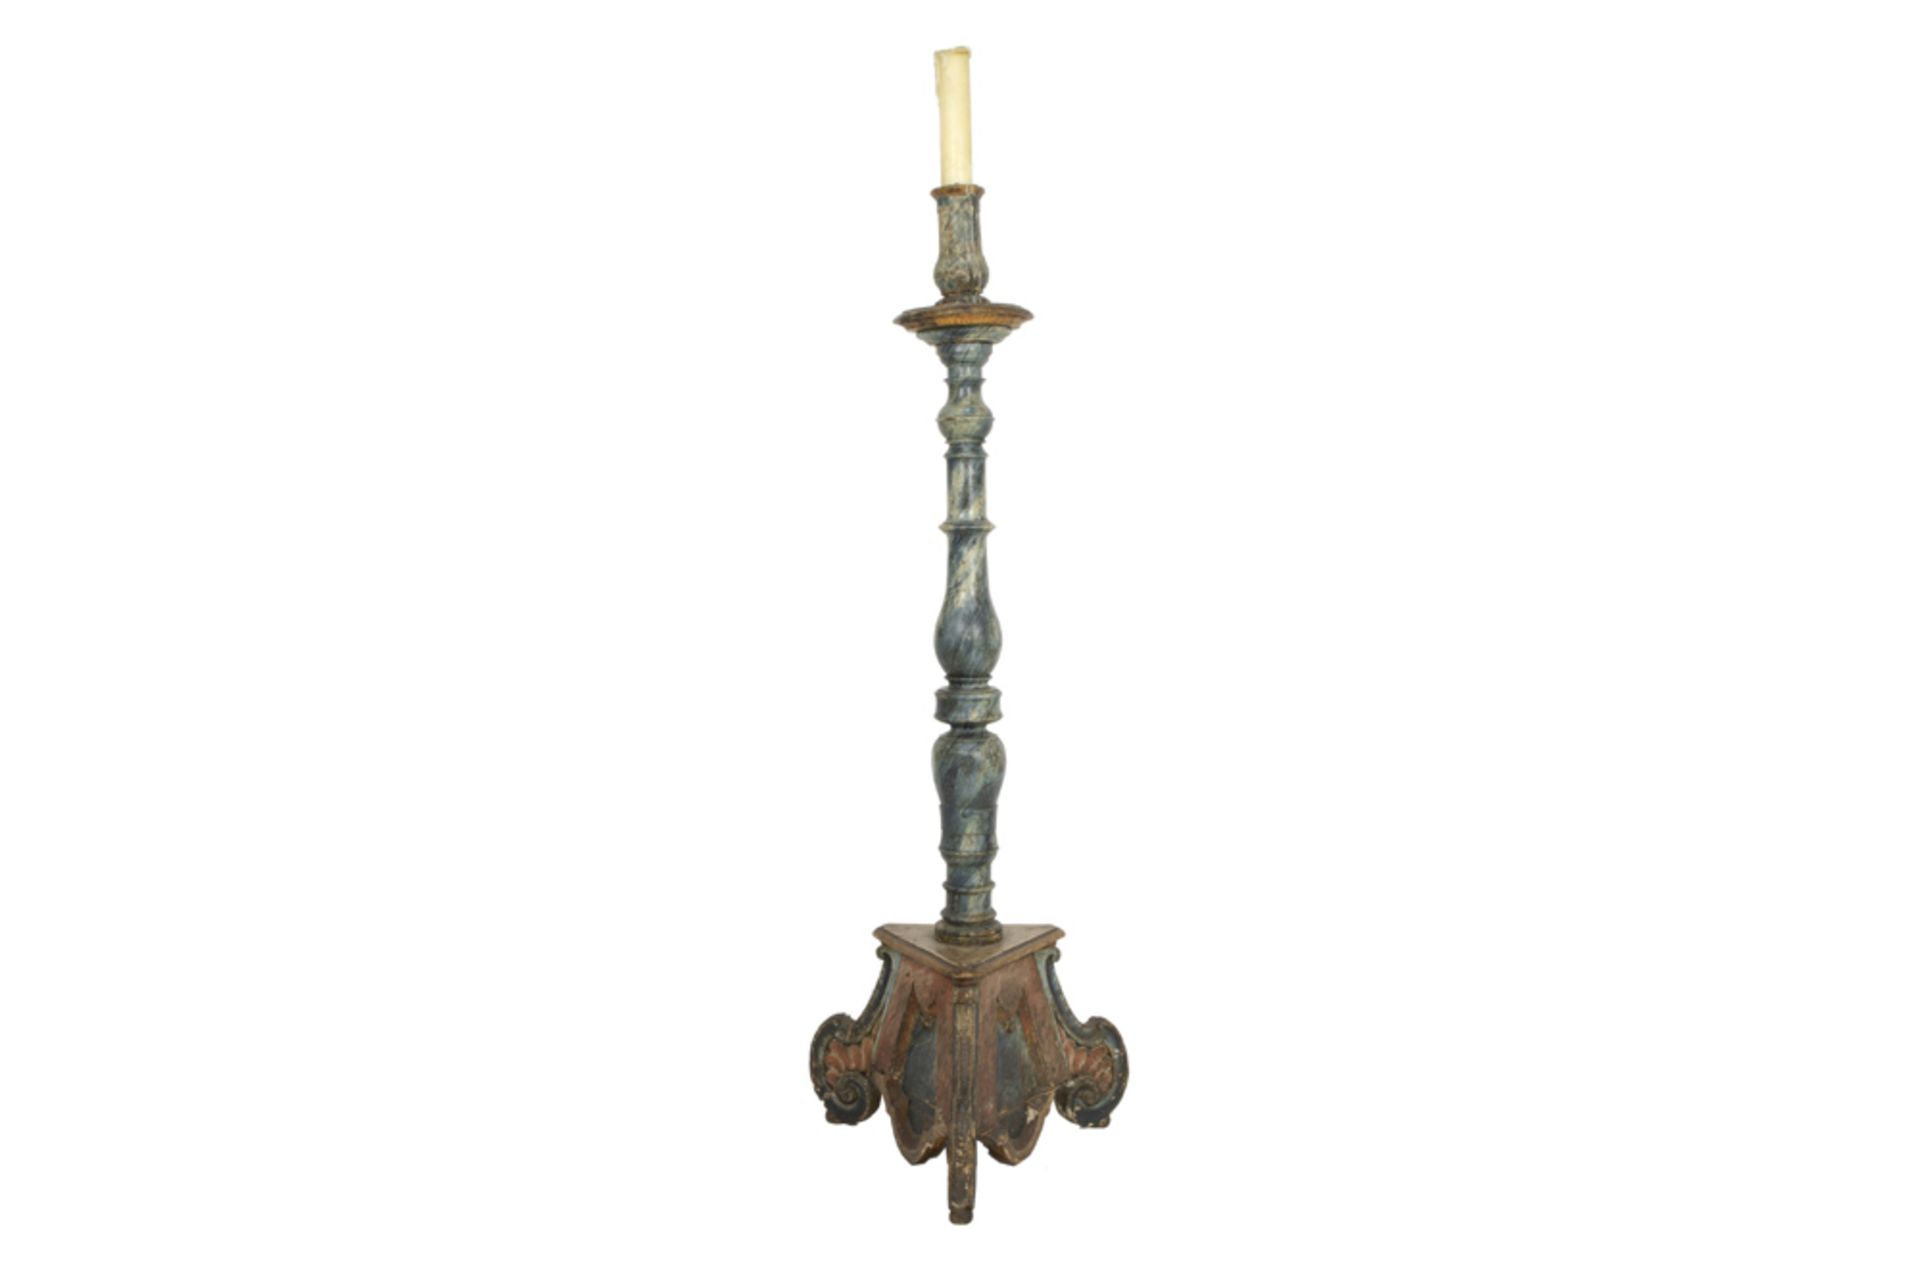 quite big 19th Cent. Italian candlestick in polychromed wood || Vrij grote negentiende eeuwse